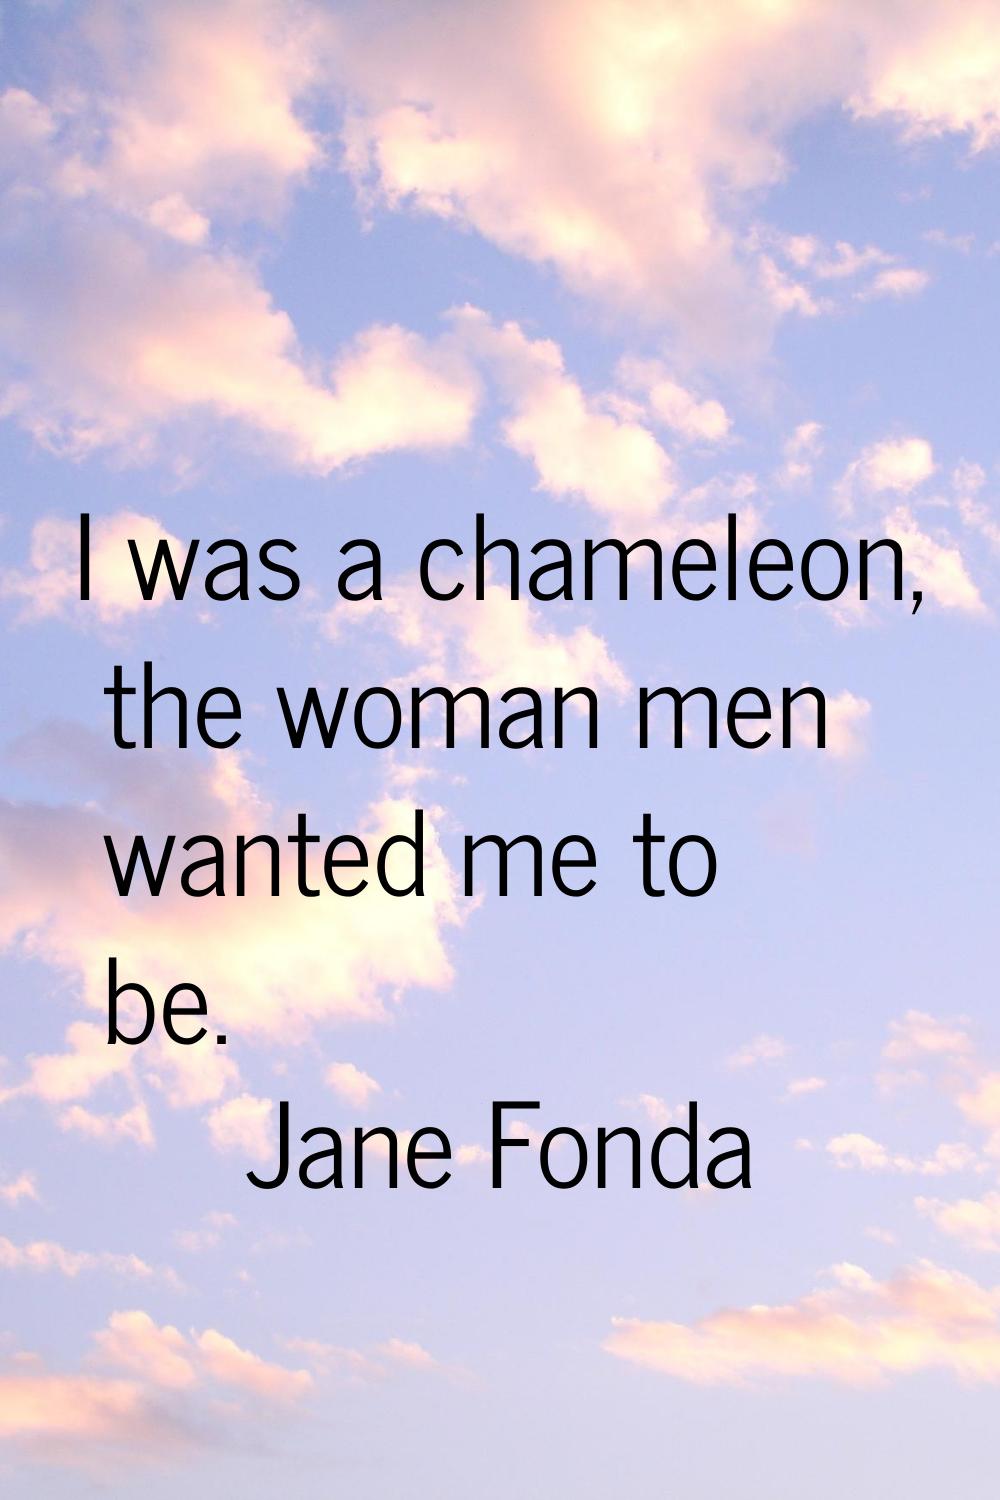 I was a chameleon, the woman men wanted me to be.